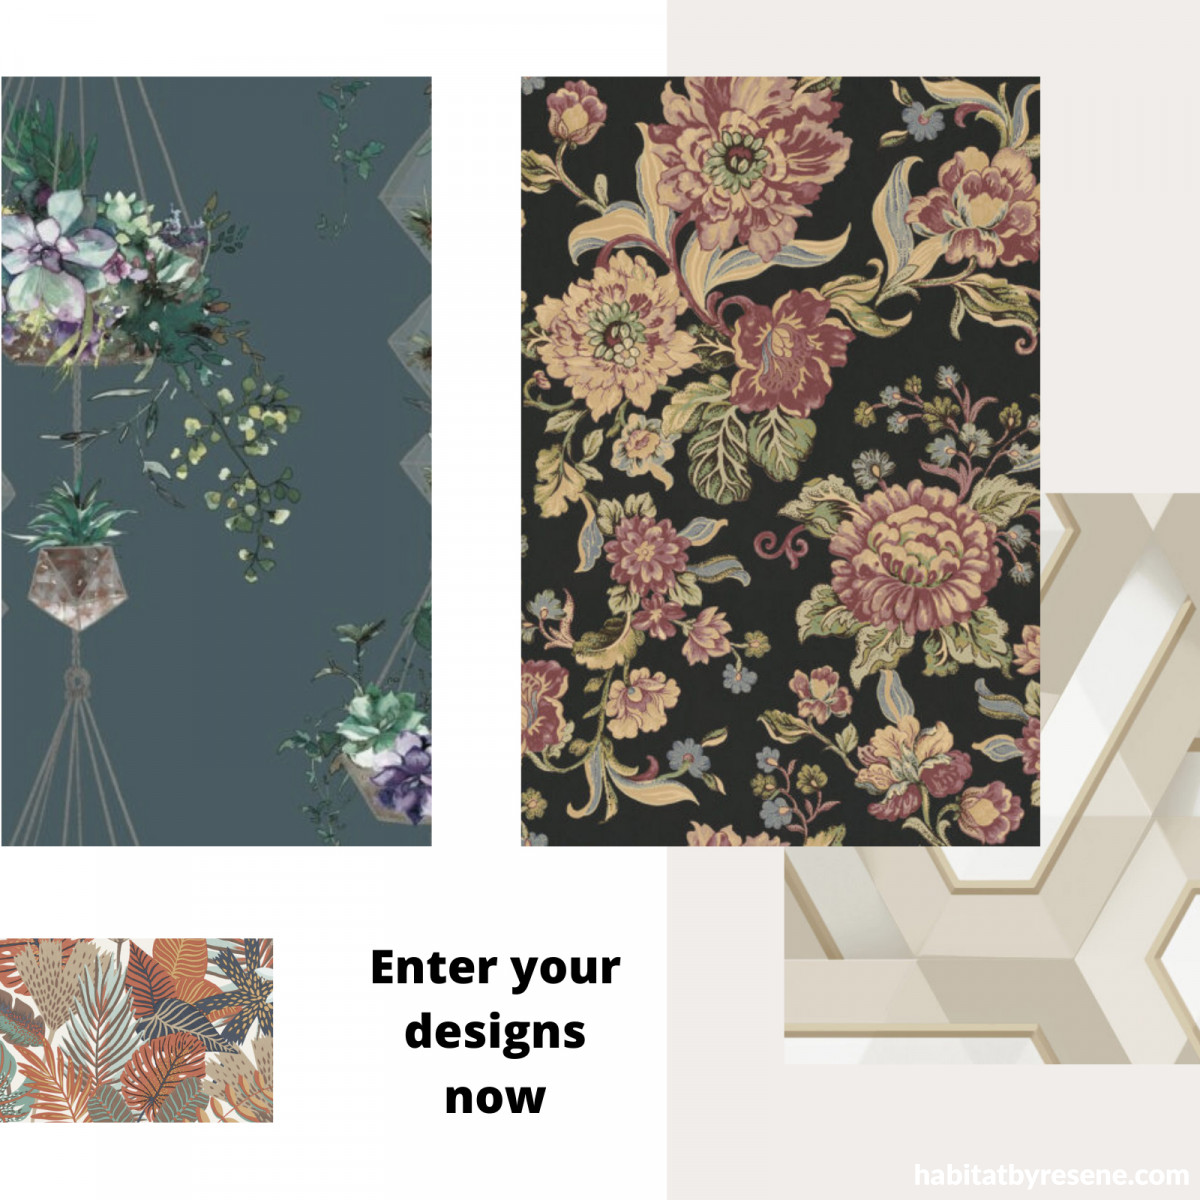 Entries are now open for the Resene Wallpaper Design Competition ...